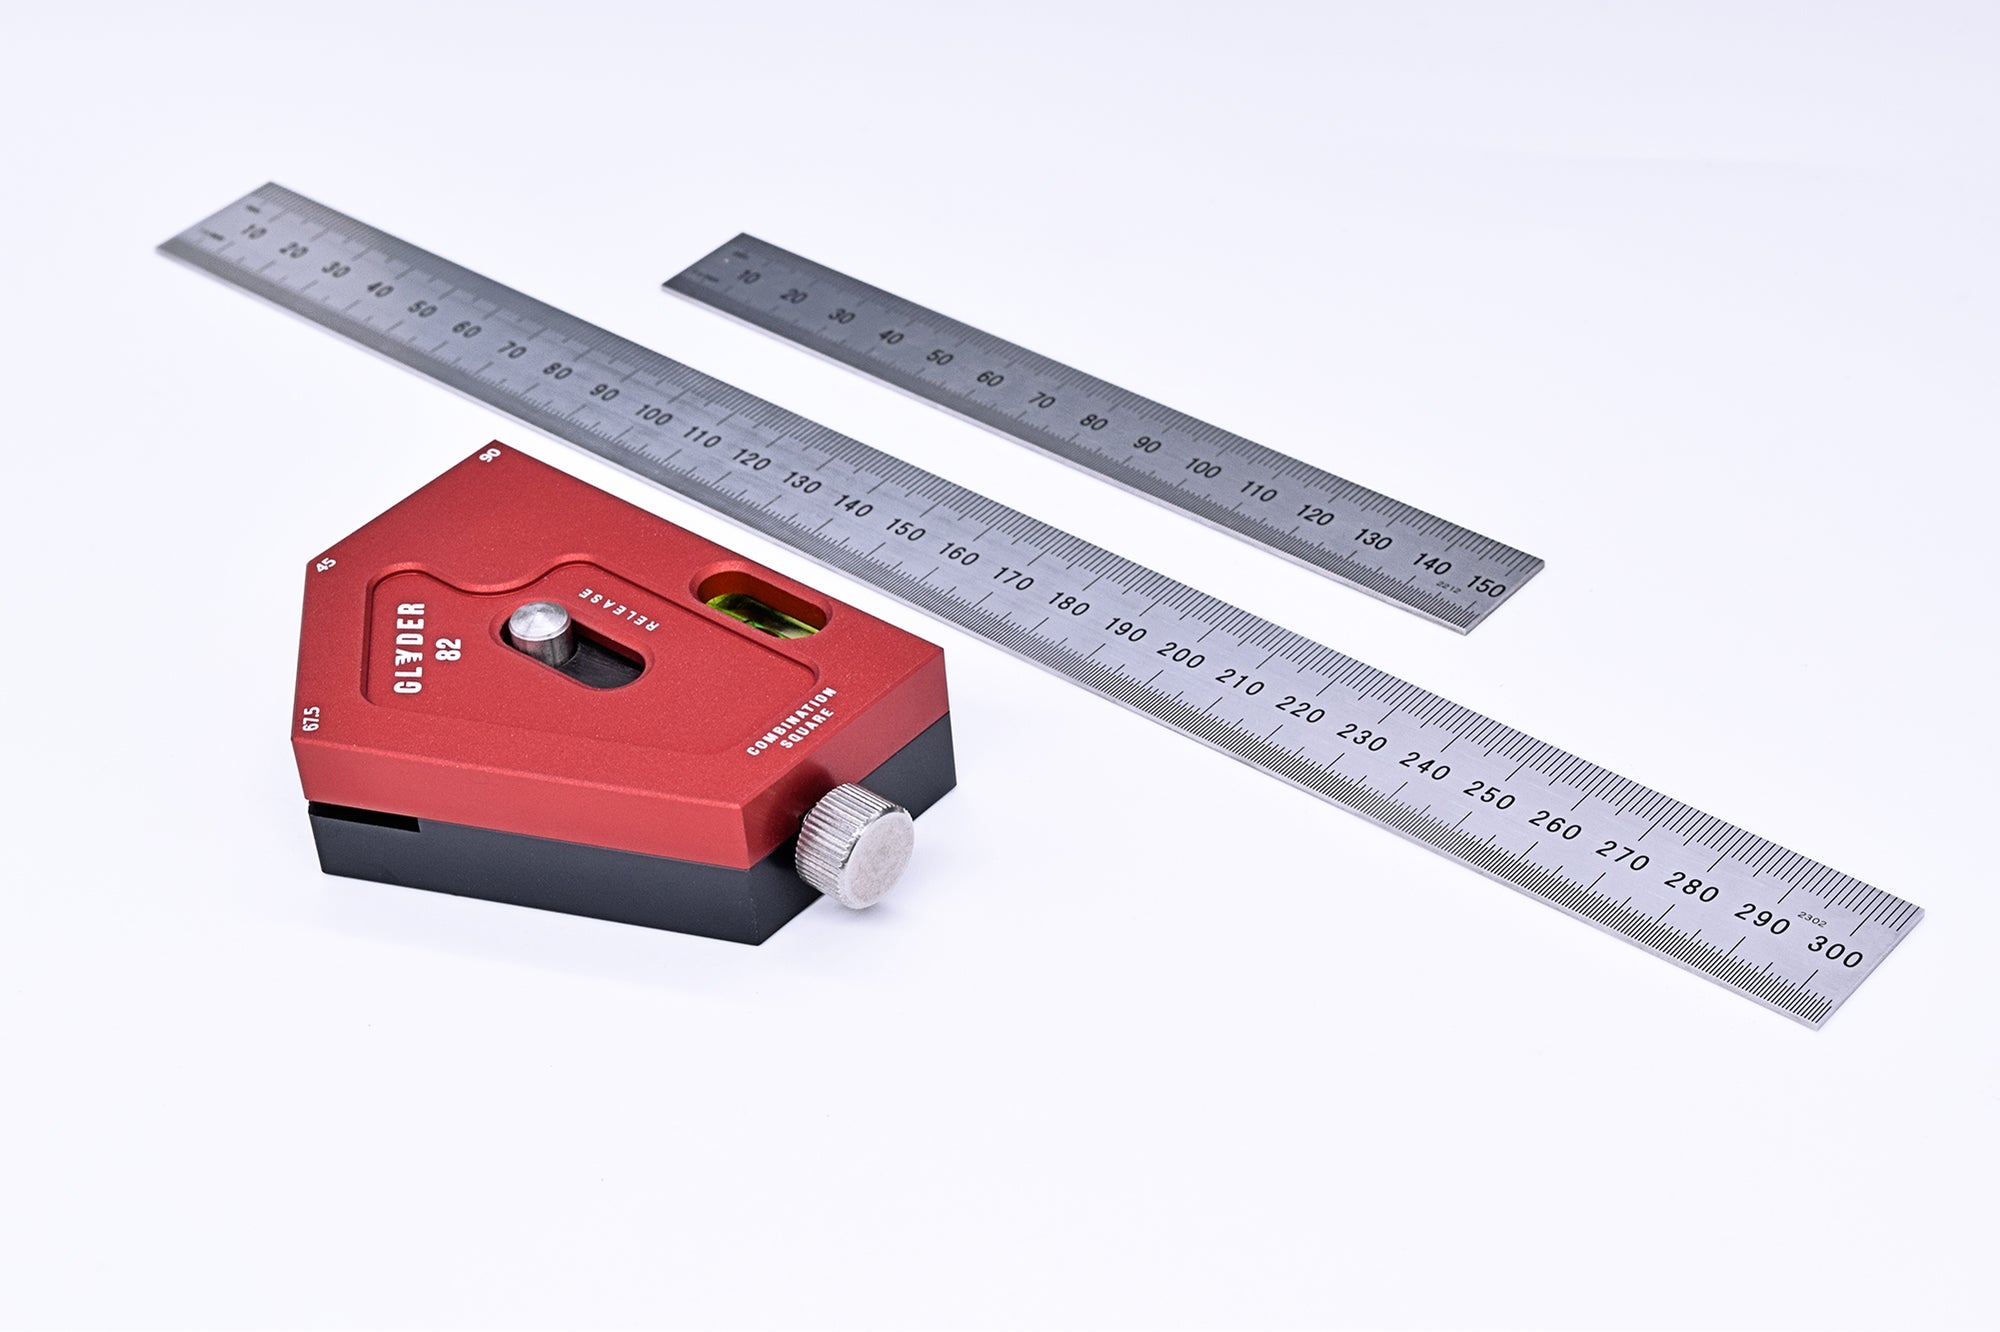 Glyder 82 Combination Square (Body Only)